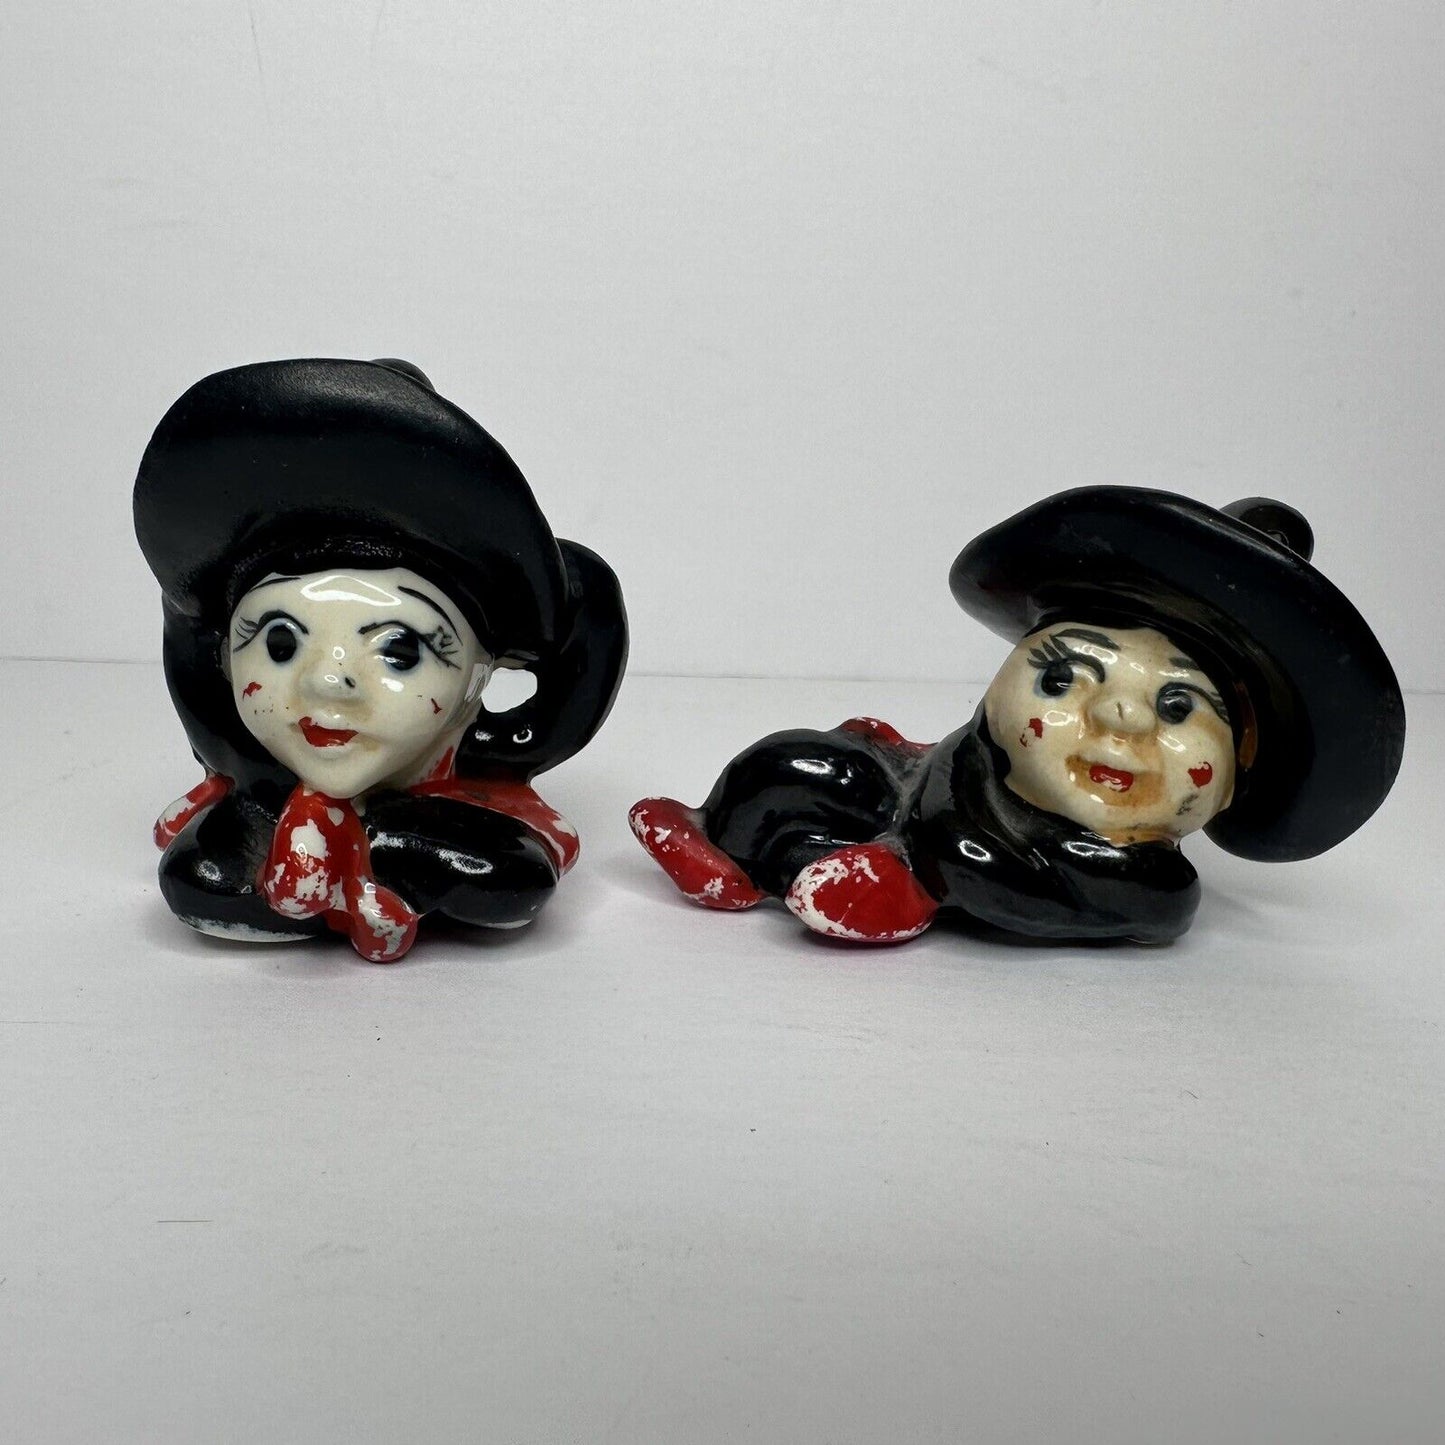 Rare Vintage 1960s Witches Salt & Pepper Shaker Set - Made in Occupied Japan - Halloween Decor - TreasuTiques